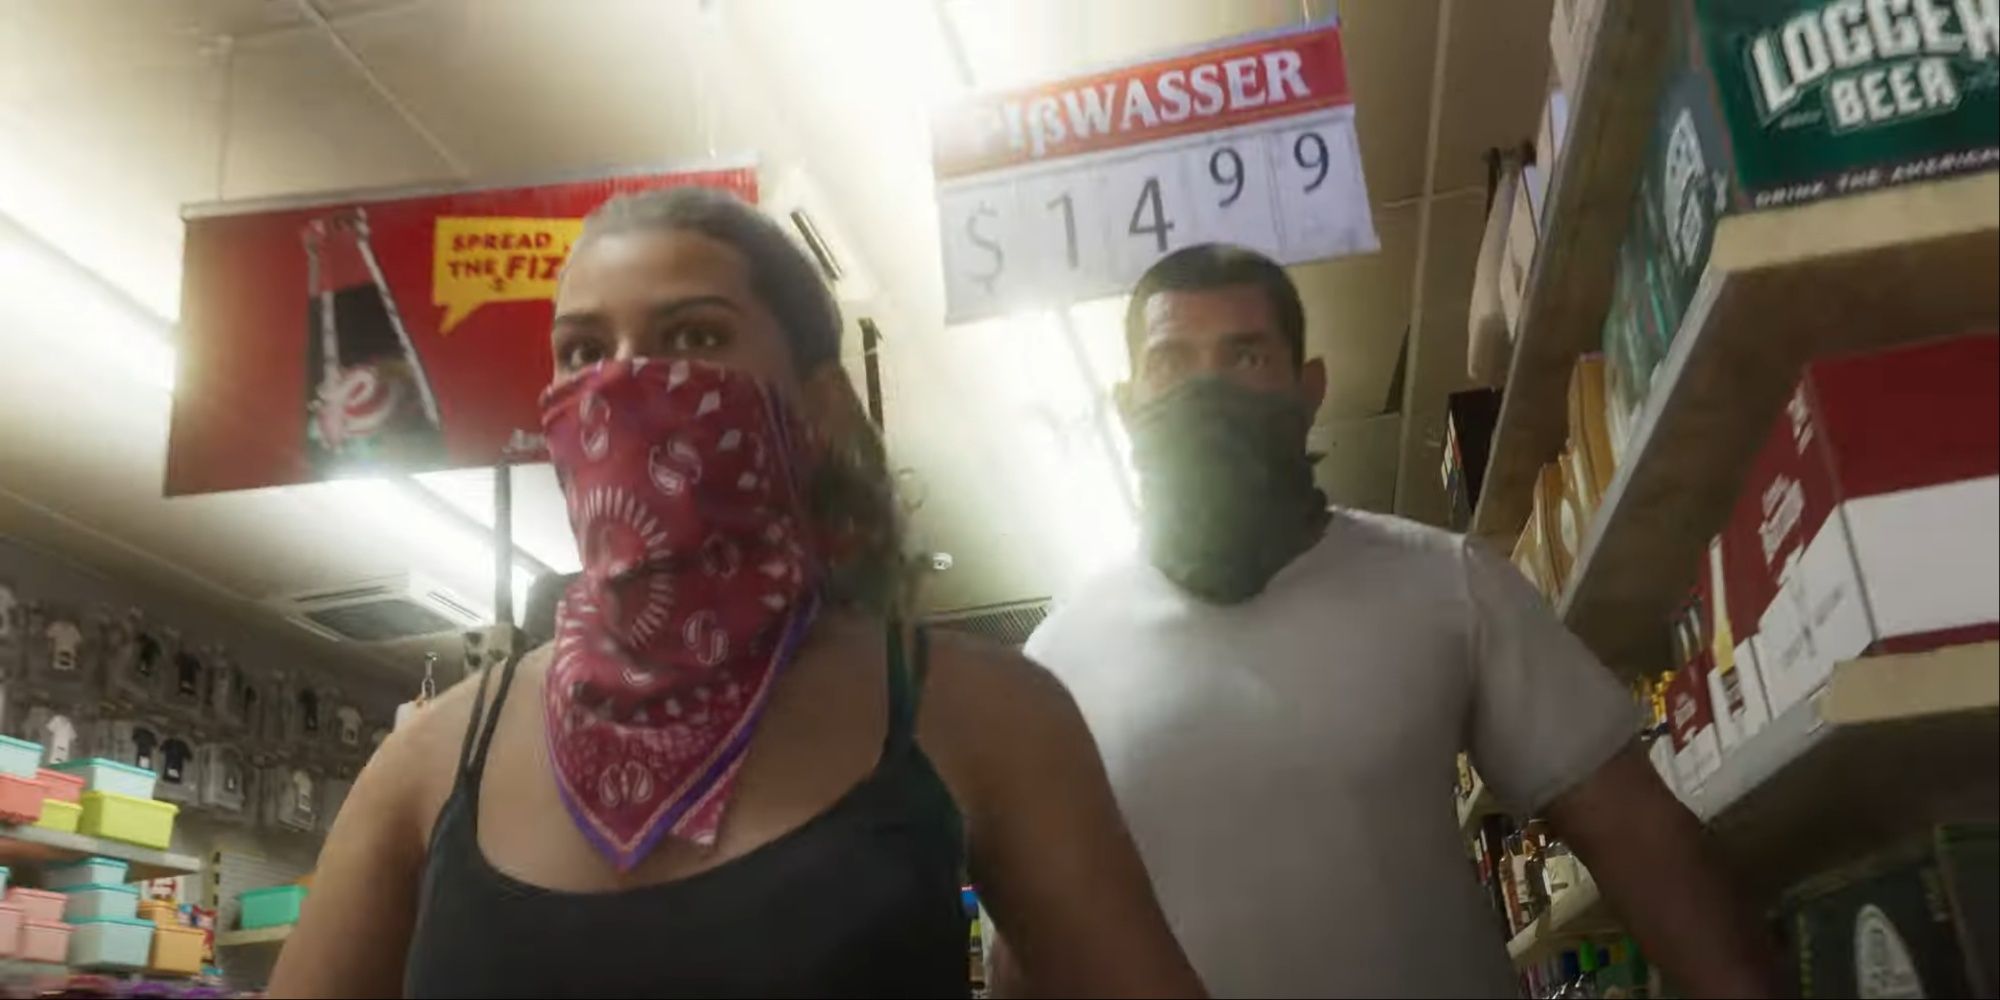 Lucia wearing a red bandana and walking in front of her partner down an aisle with lots of notable beer brand products from the GTA series.